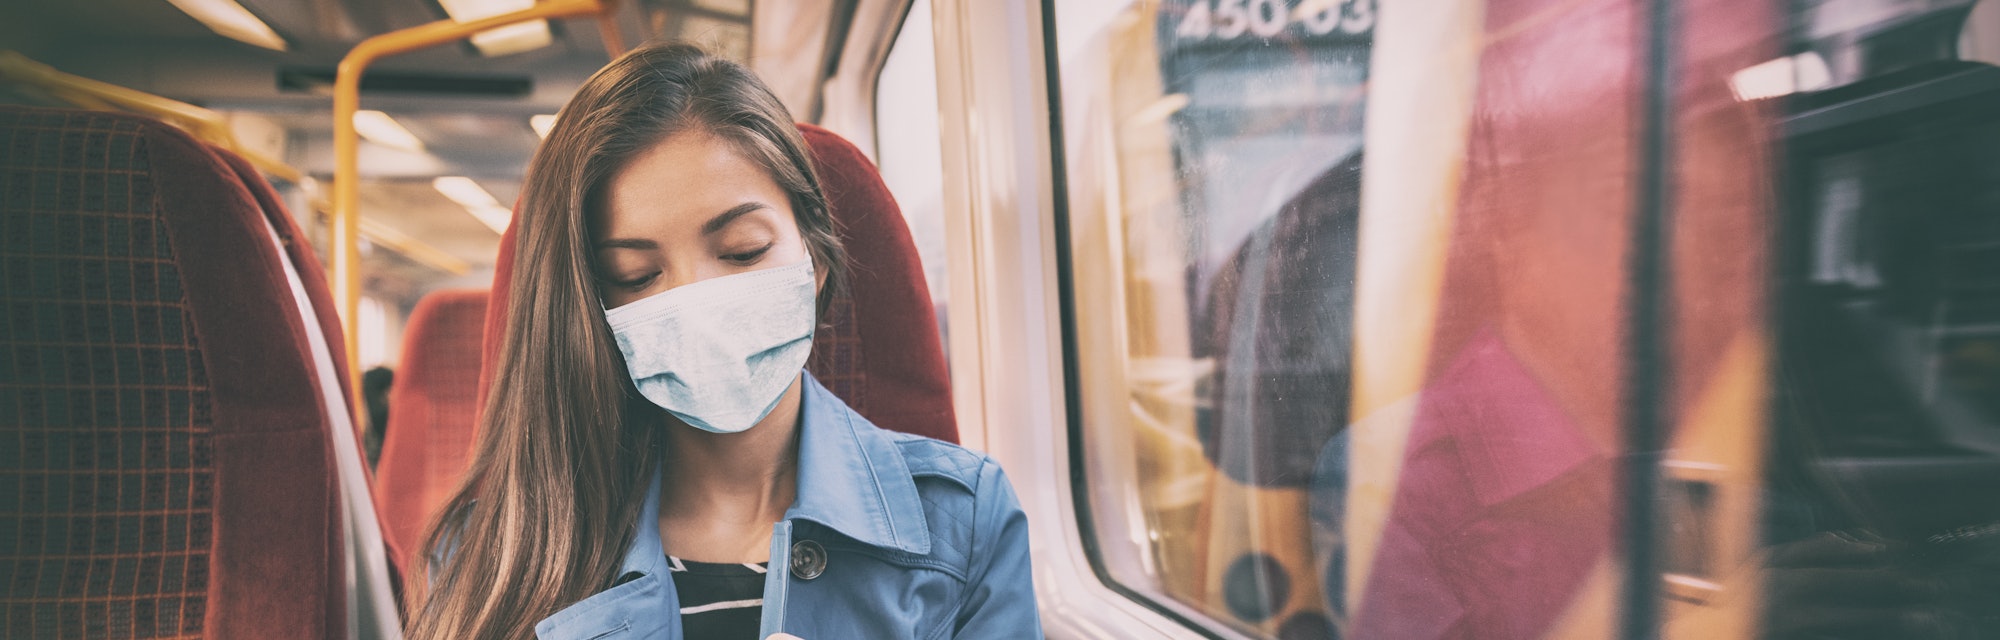 Face mask concept. Woman wearing mandatory mask inside public spaces for transport such as train sta...